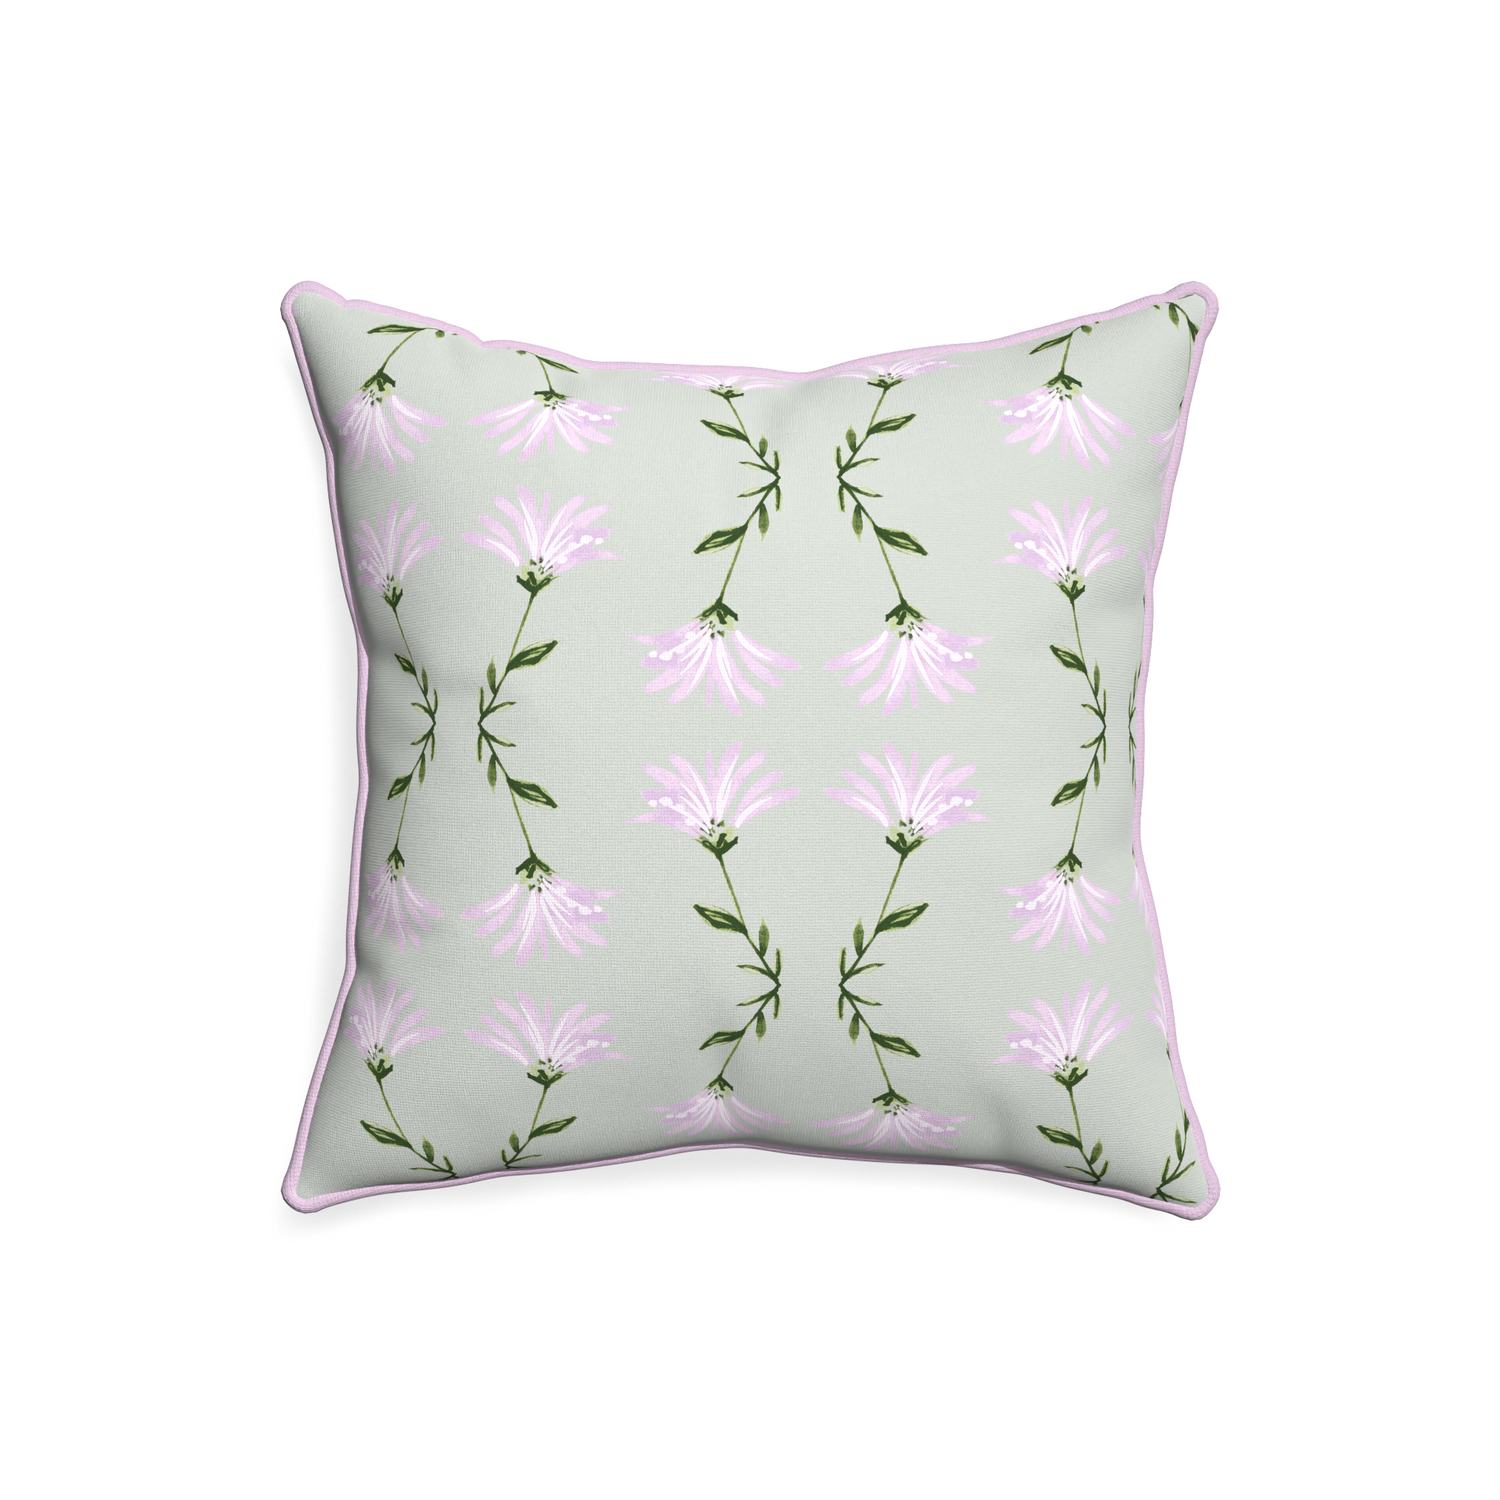 20-square marina sage custom pillow with l piping on white background